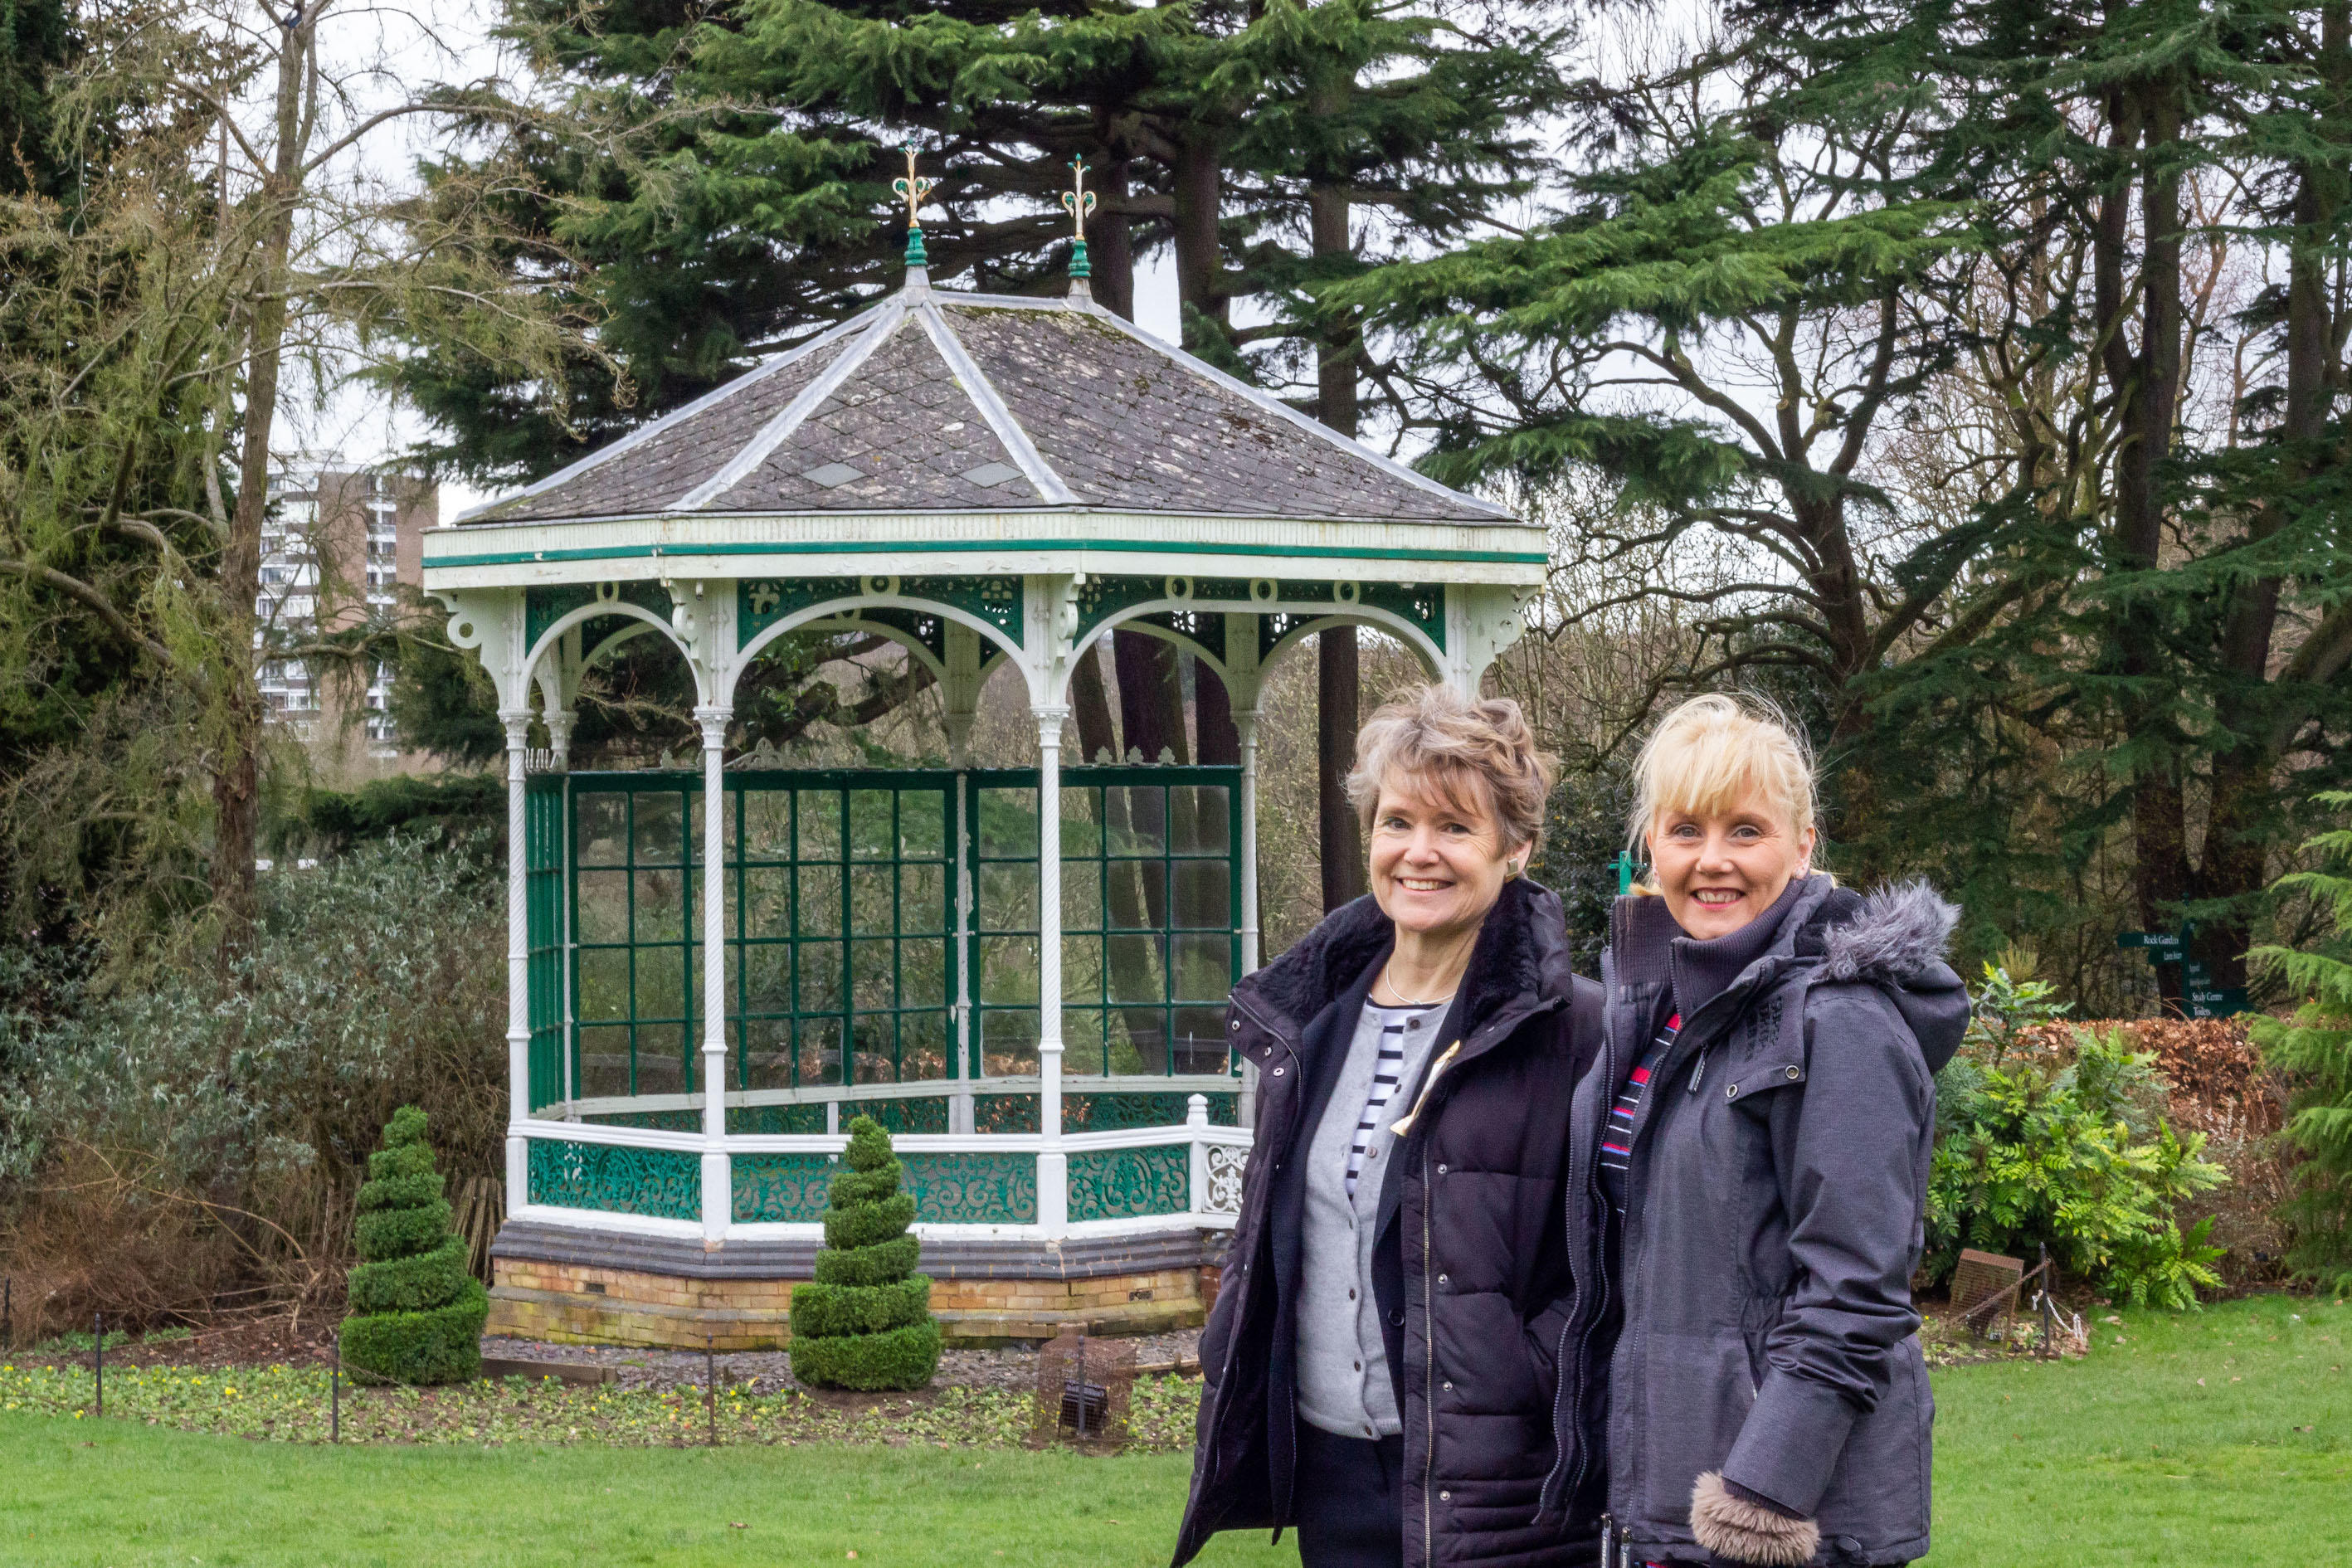 Birmingham Botanical Gardens launches appeal to restore historic